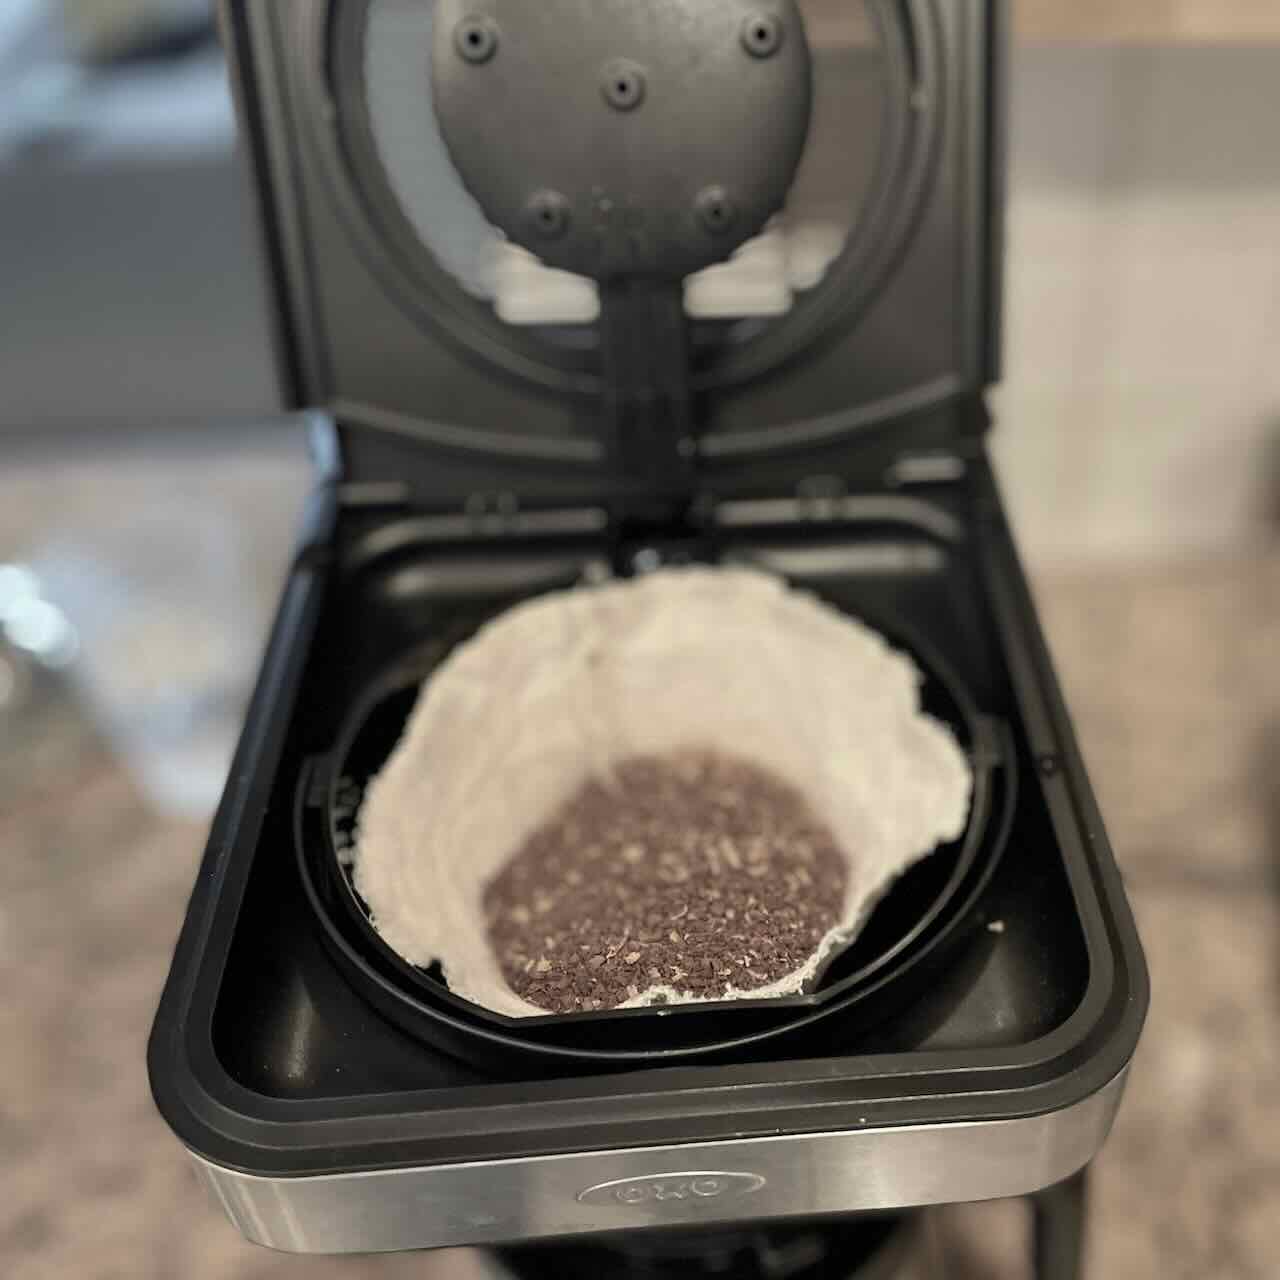 size 4 coffee filter filled with ground coffee inside basket in the coffee maker